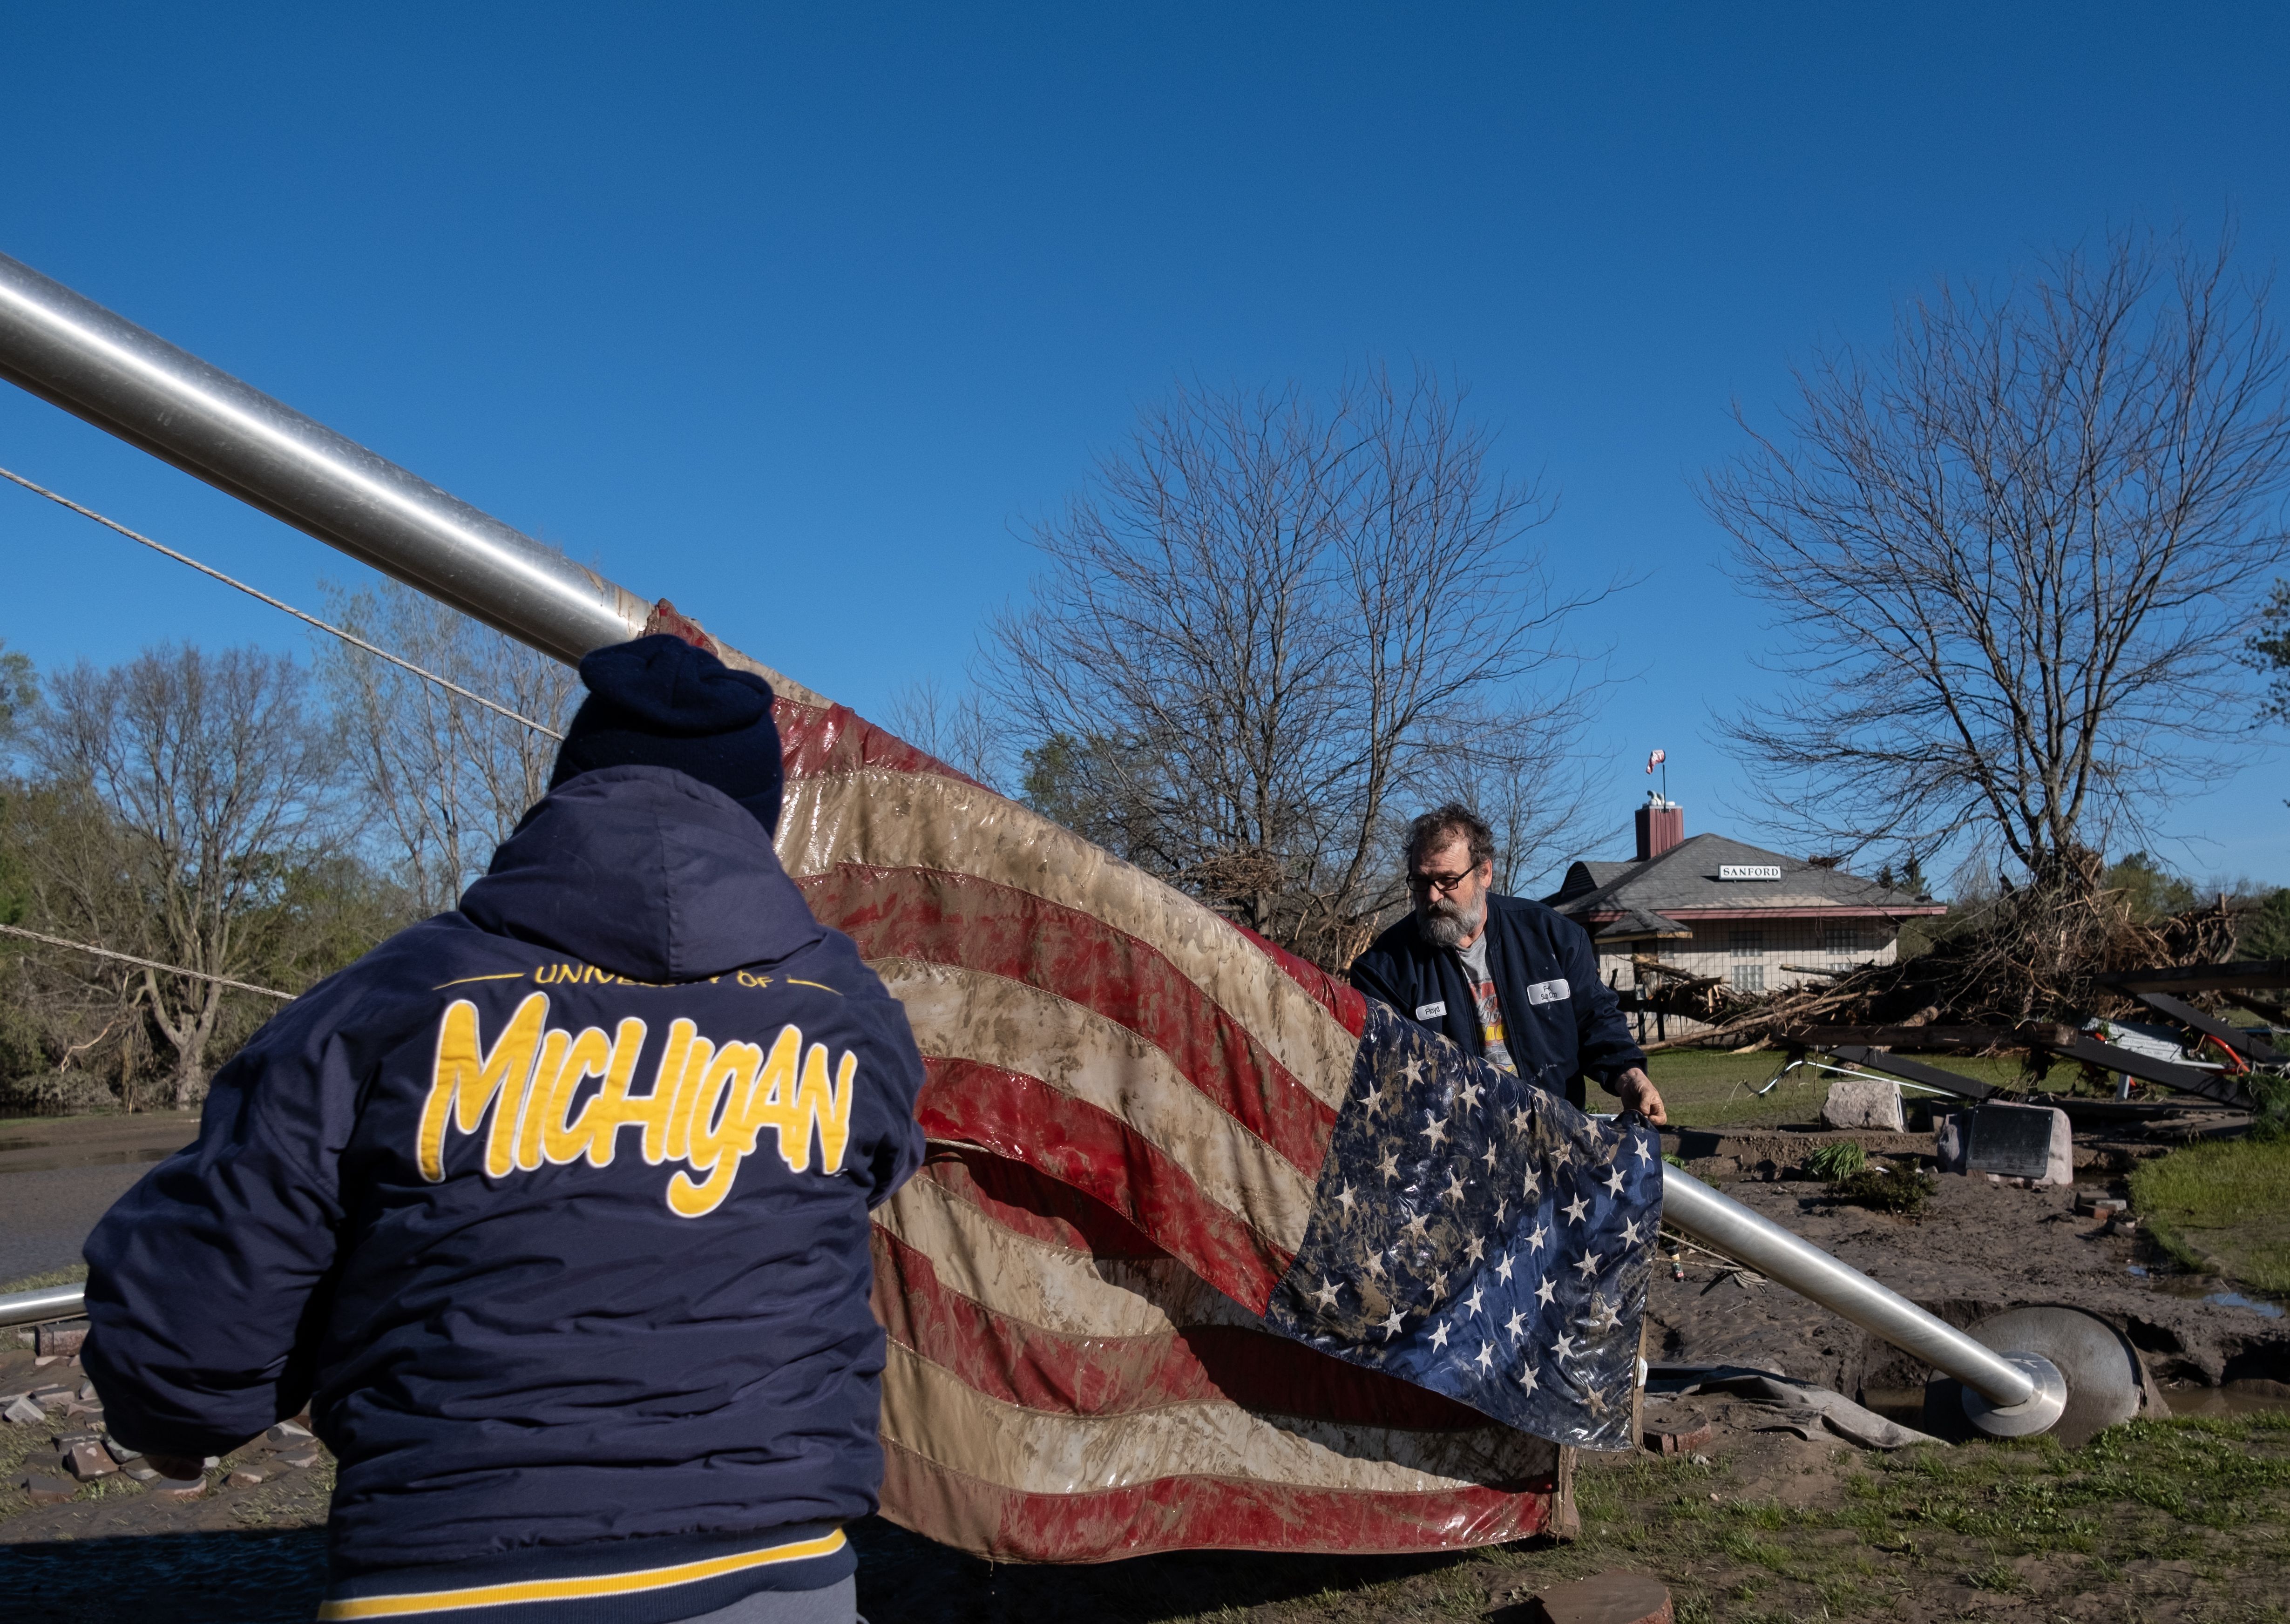 In this image, two people lift a large muddy American flag 